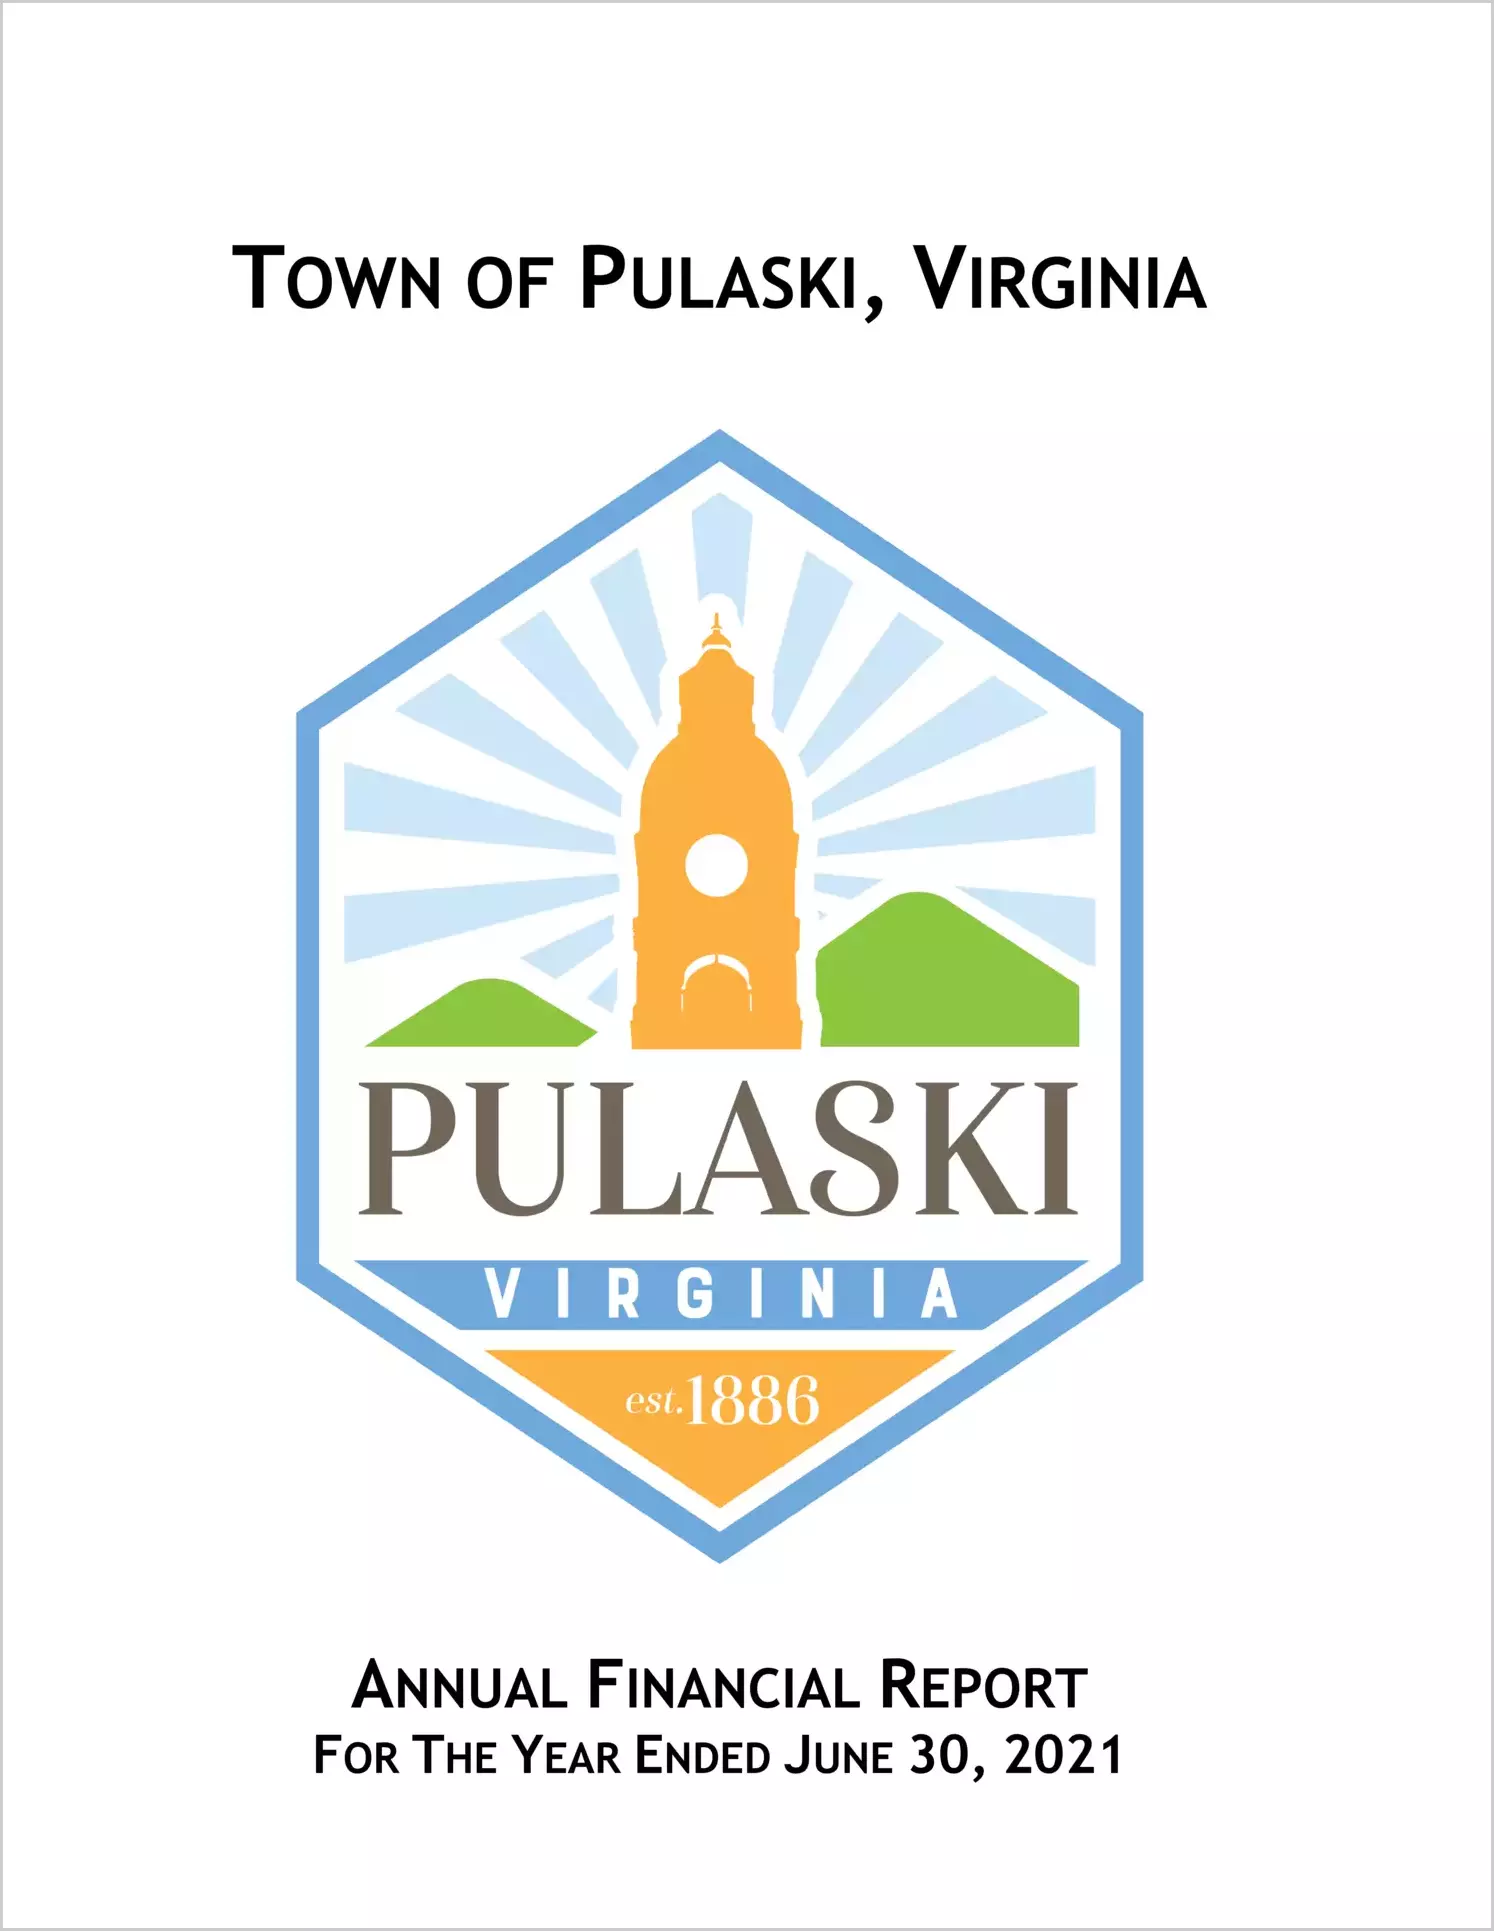 2021 Annual Financial Report for Town of Pulaski